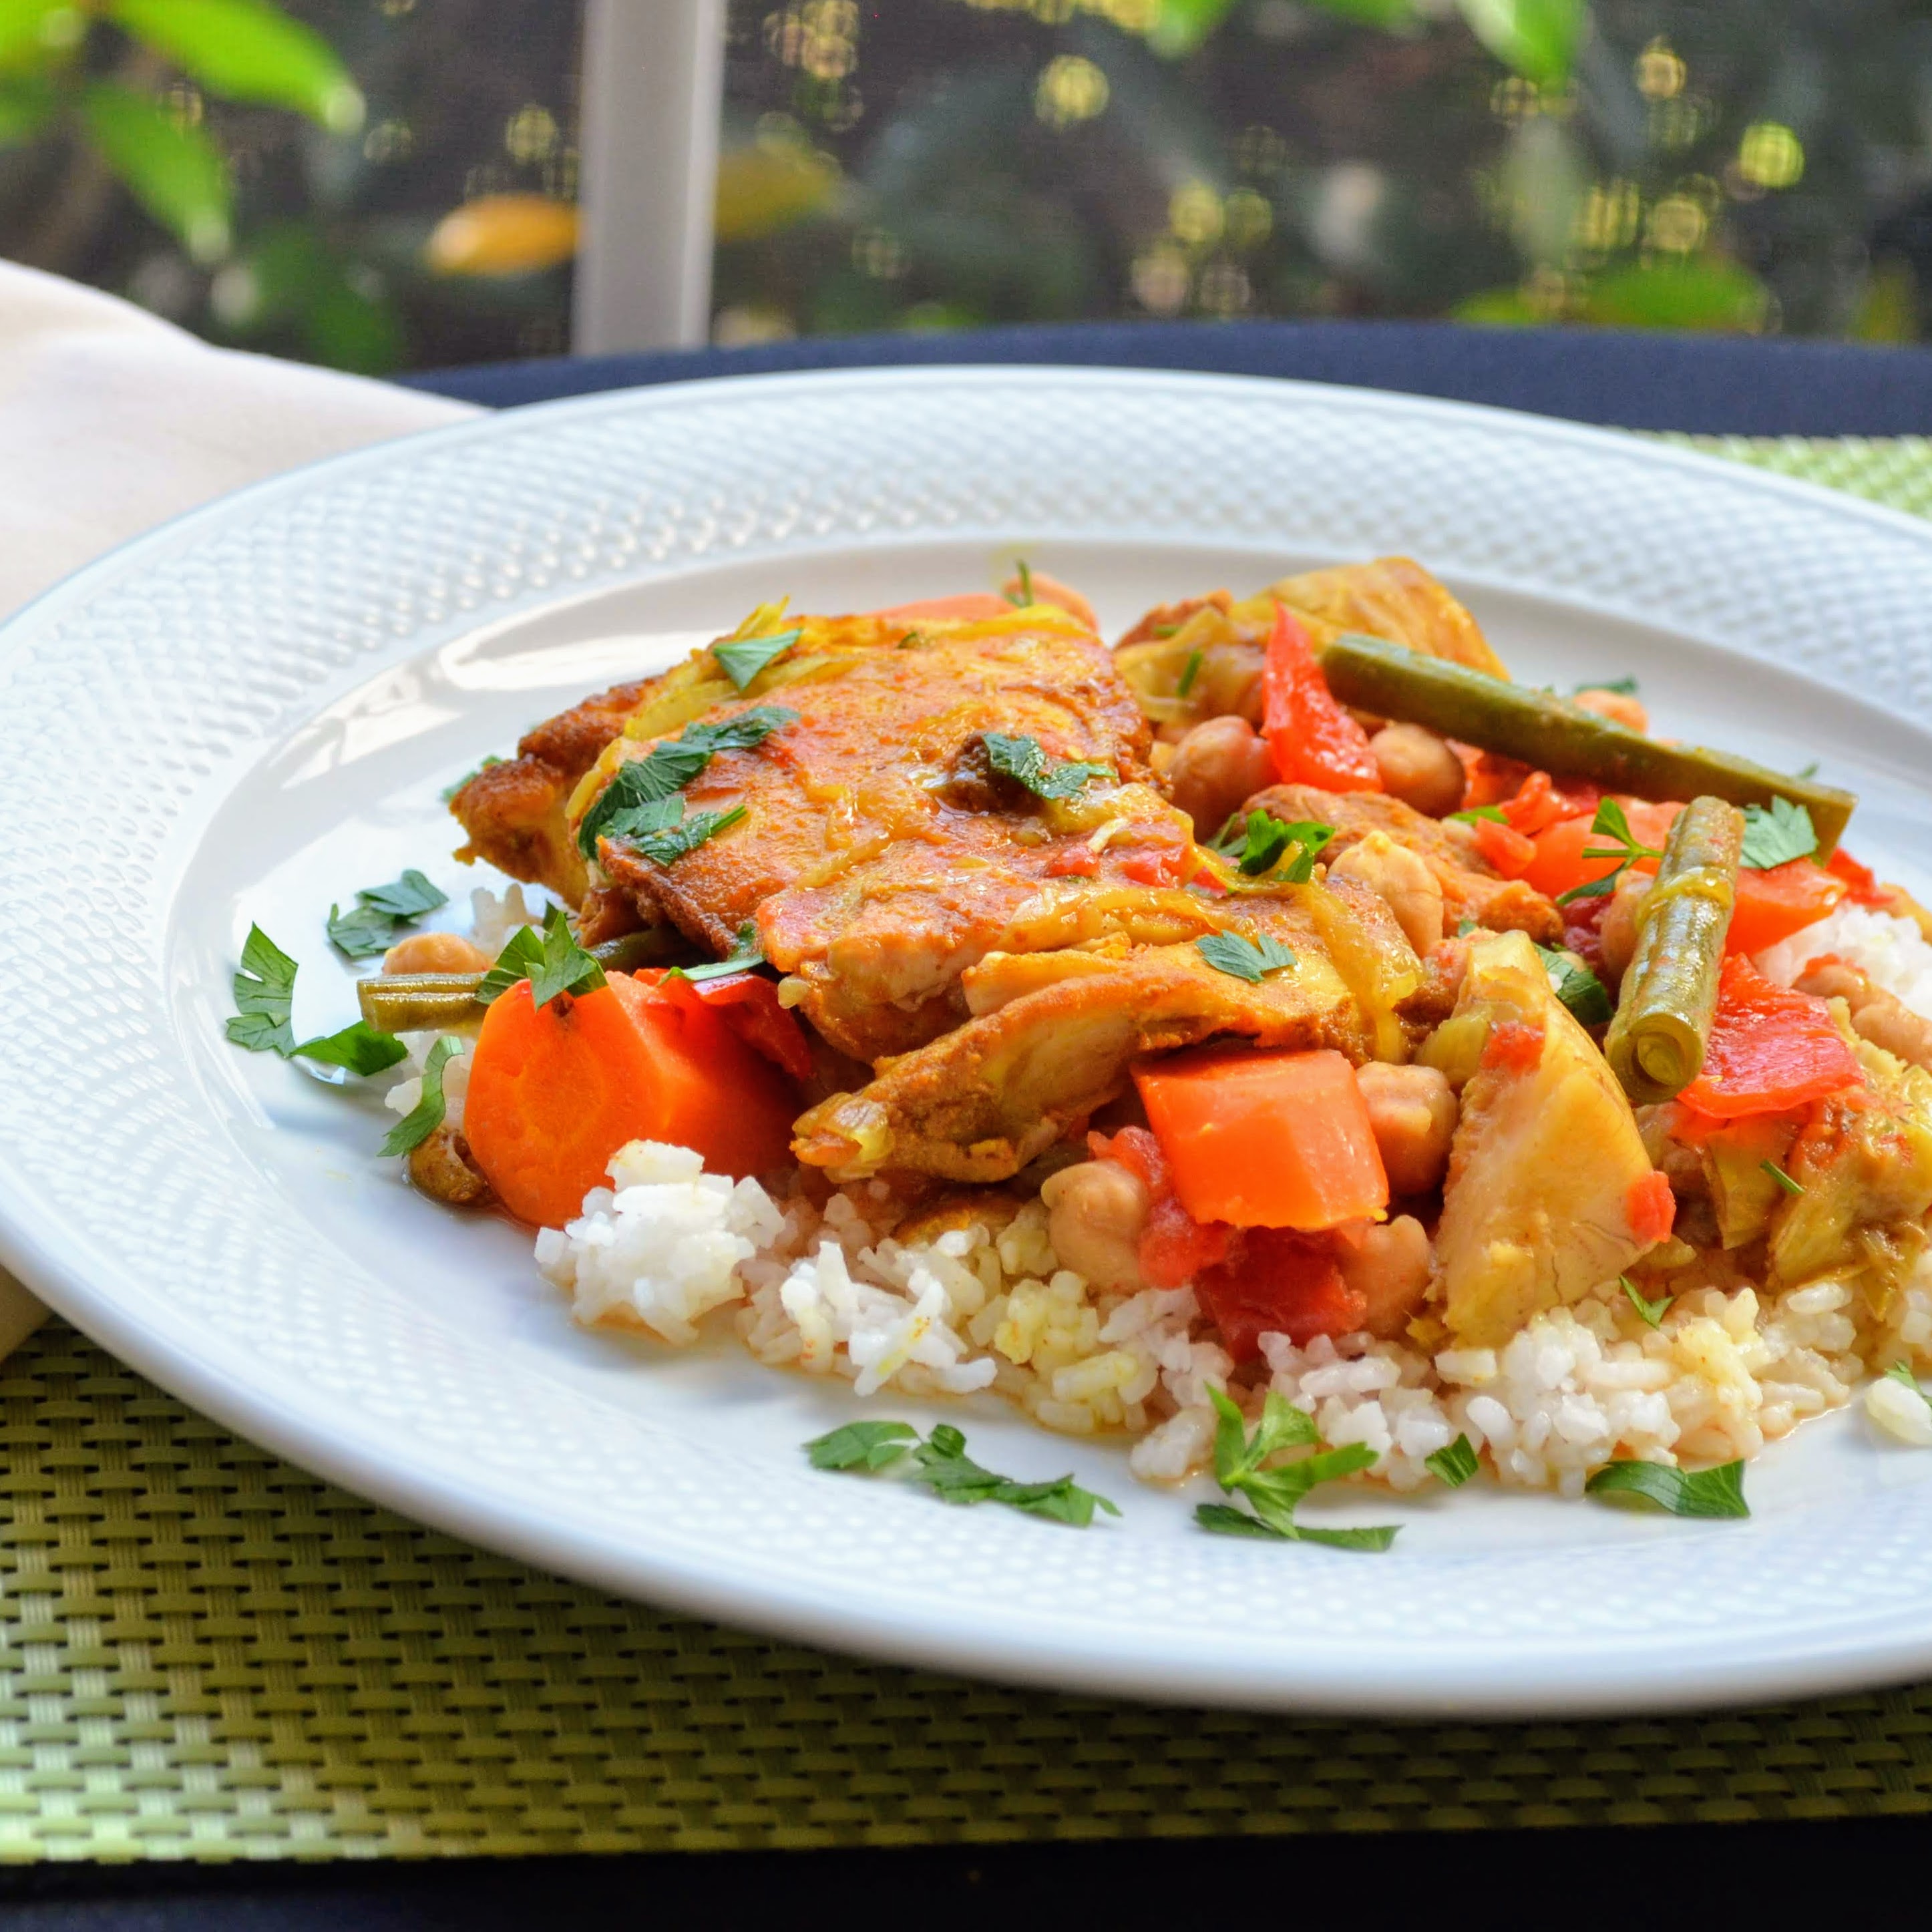 Here's a simple chicken and vegetable medley. Chicken thighs are seasoned with turmeric, ginger, coriander, cumin, and cayenne pepper and combined with chickpeas, diced tomatoes, artichoke hearts, carrots, onions, and garlic. Add green beans and bell peppers toward the end of cooking. "This delicious slow cooker meal of chicken and vegetables pairs up nicely with couscous and pita bread," says DebMCE4.
                          